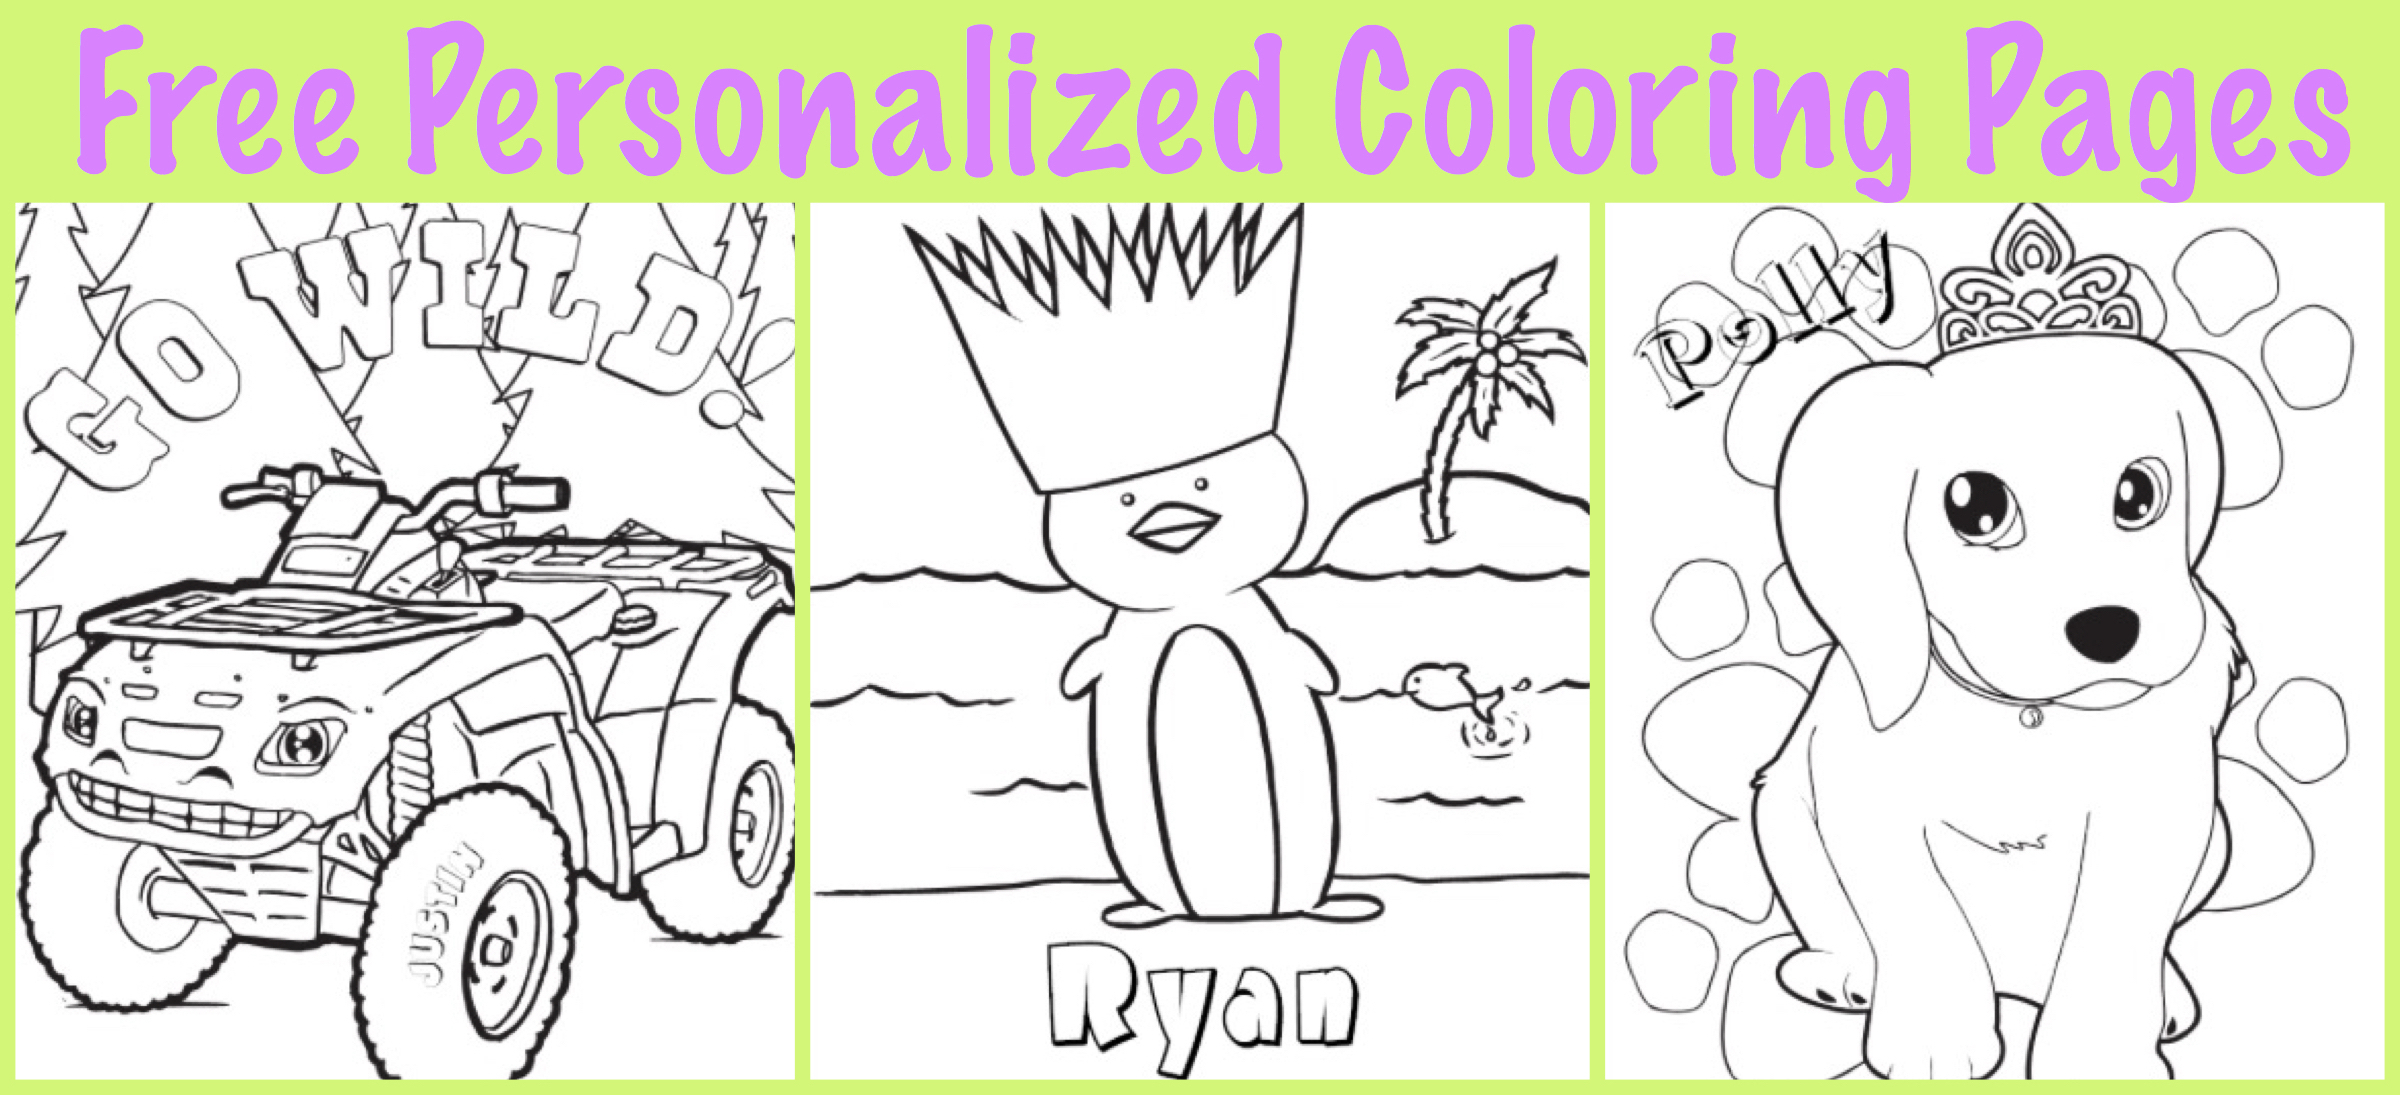 Customized Coloring Pages Customized Coloring Pages Free Personalized Printable Best Free